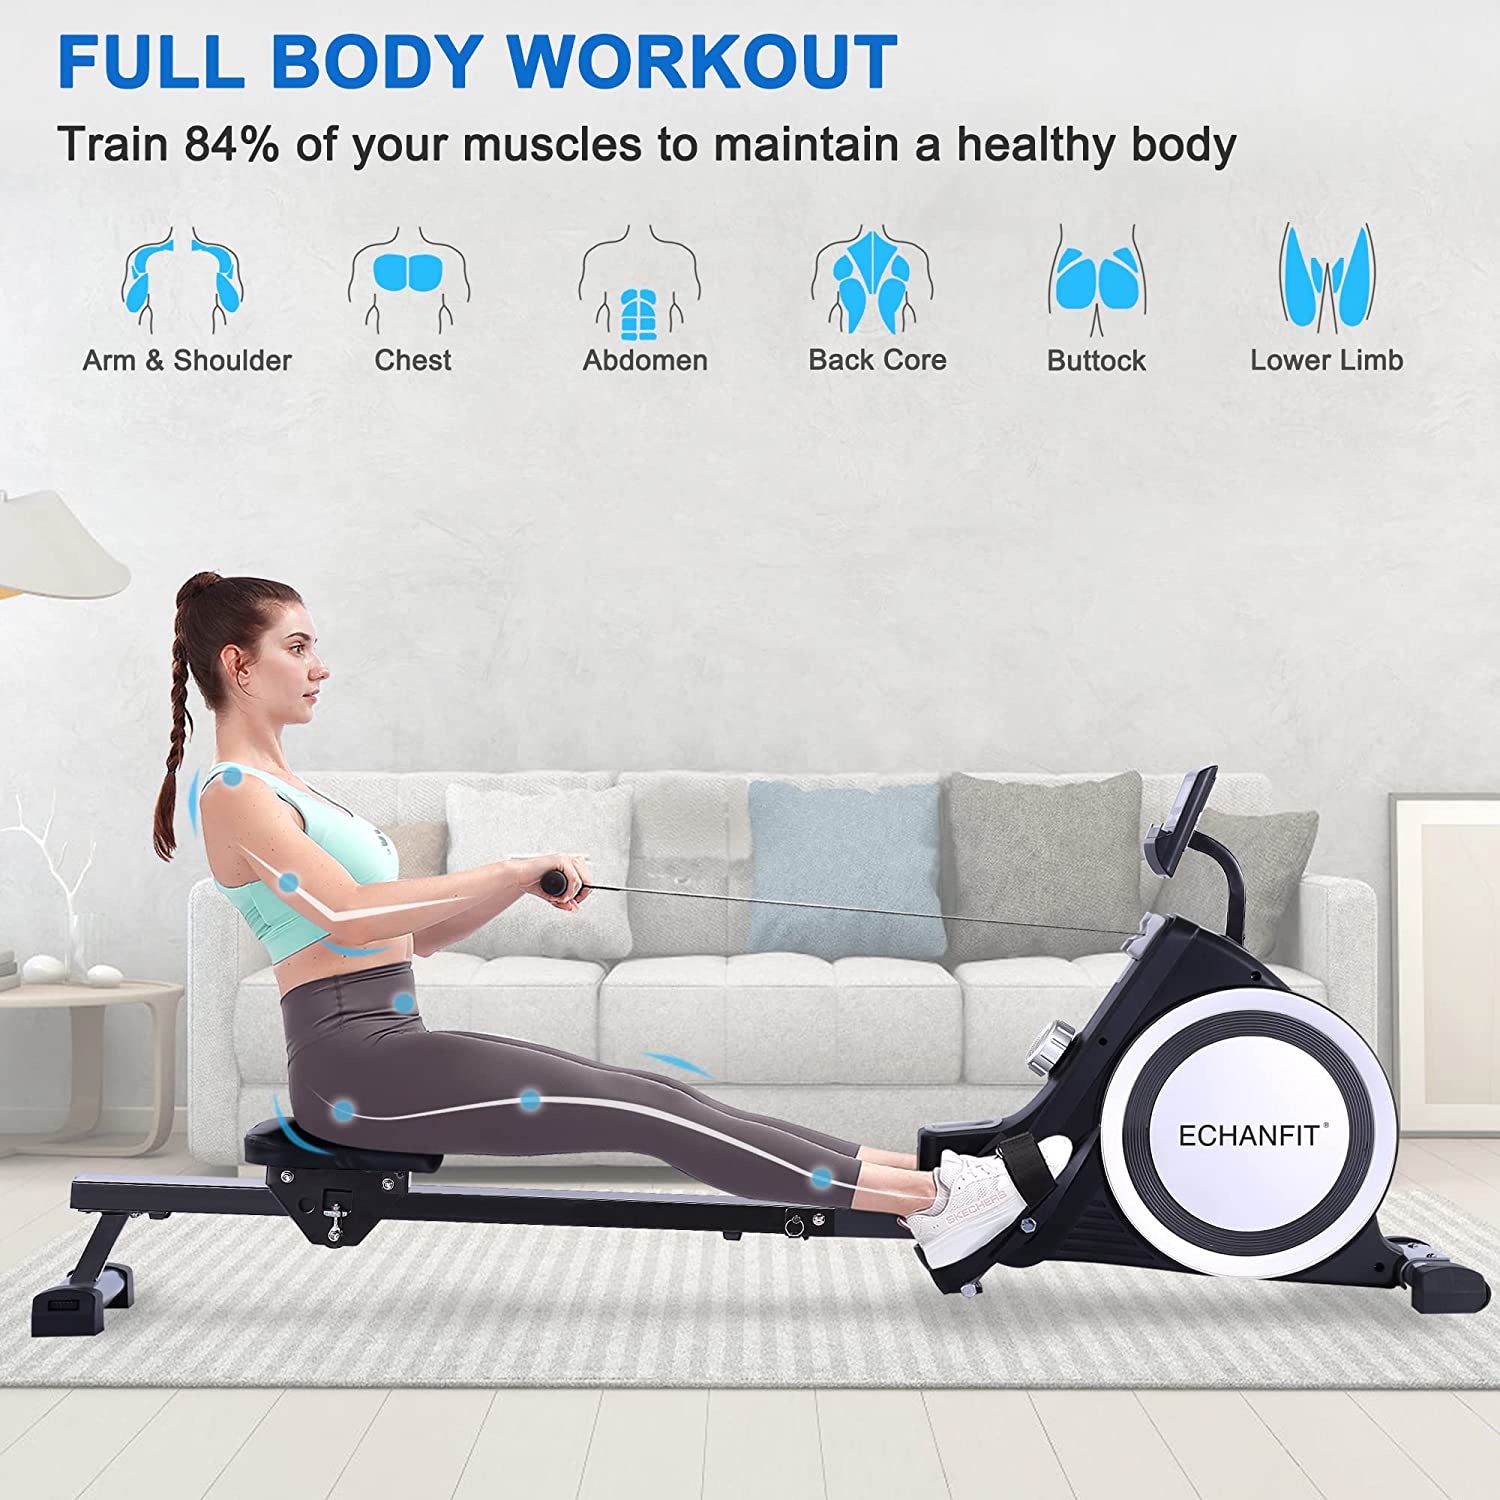 ECHANFIT Magnetic Rowing Machine with Bluetooth Fitness App for Home U